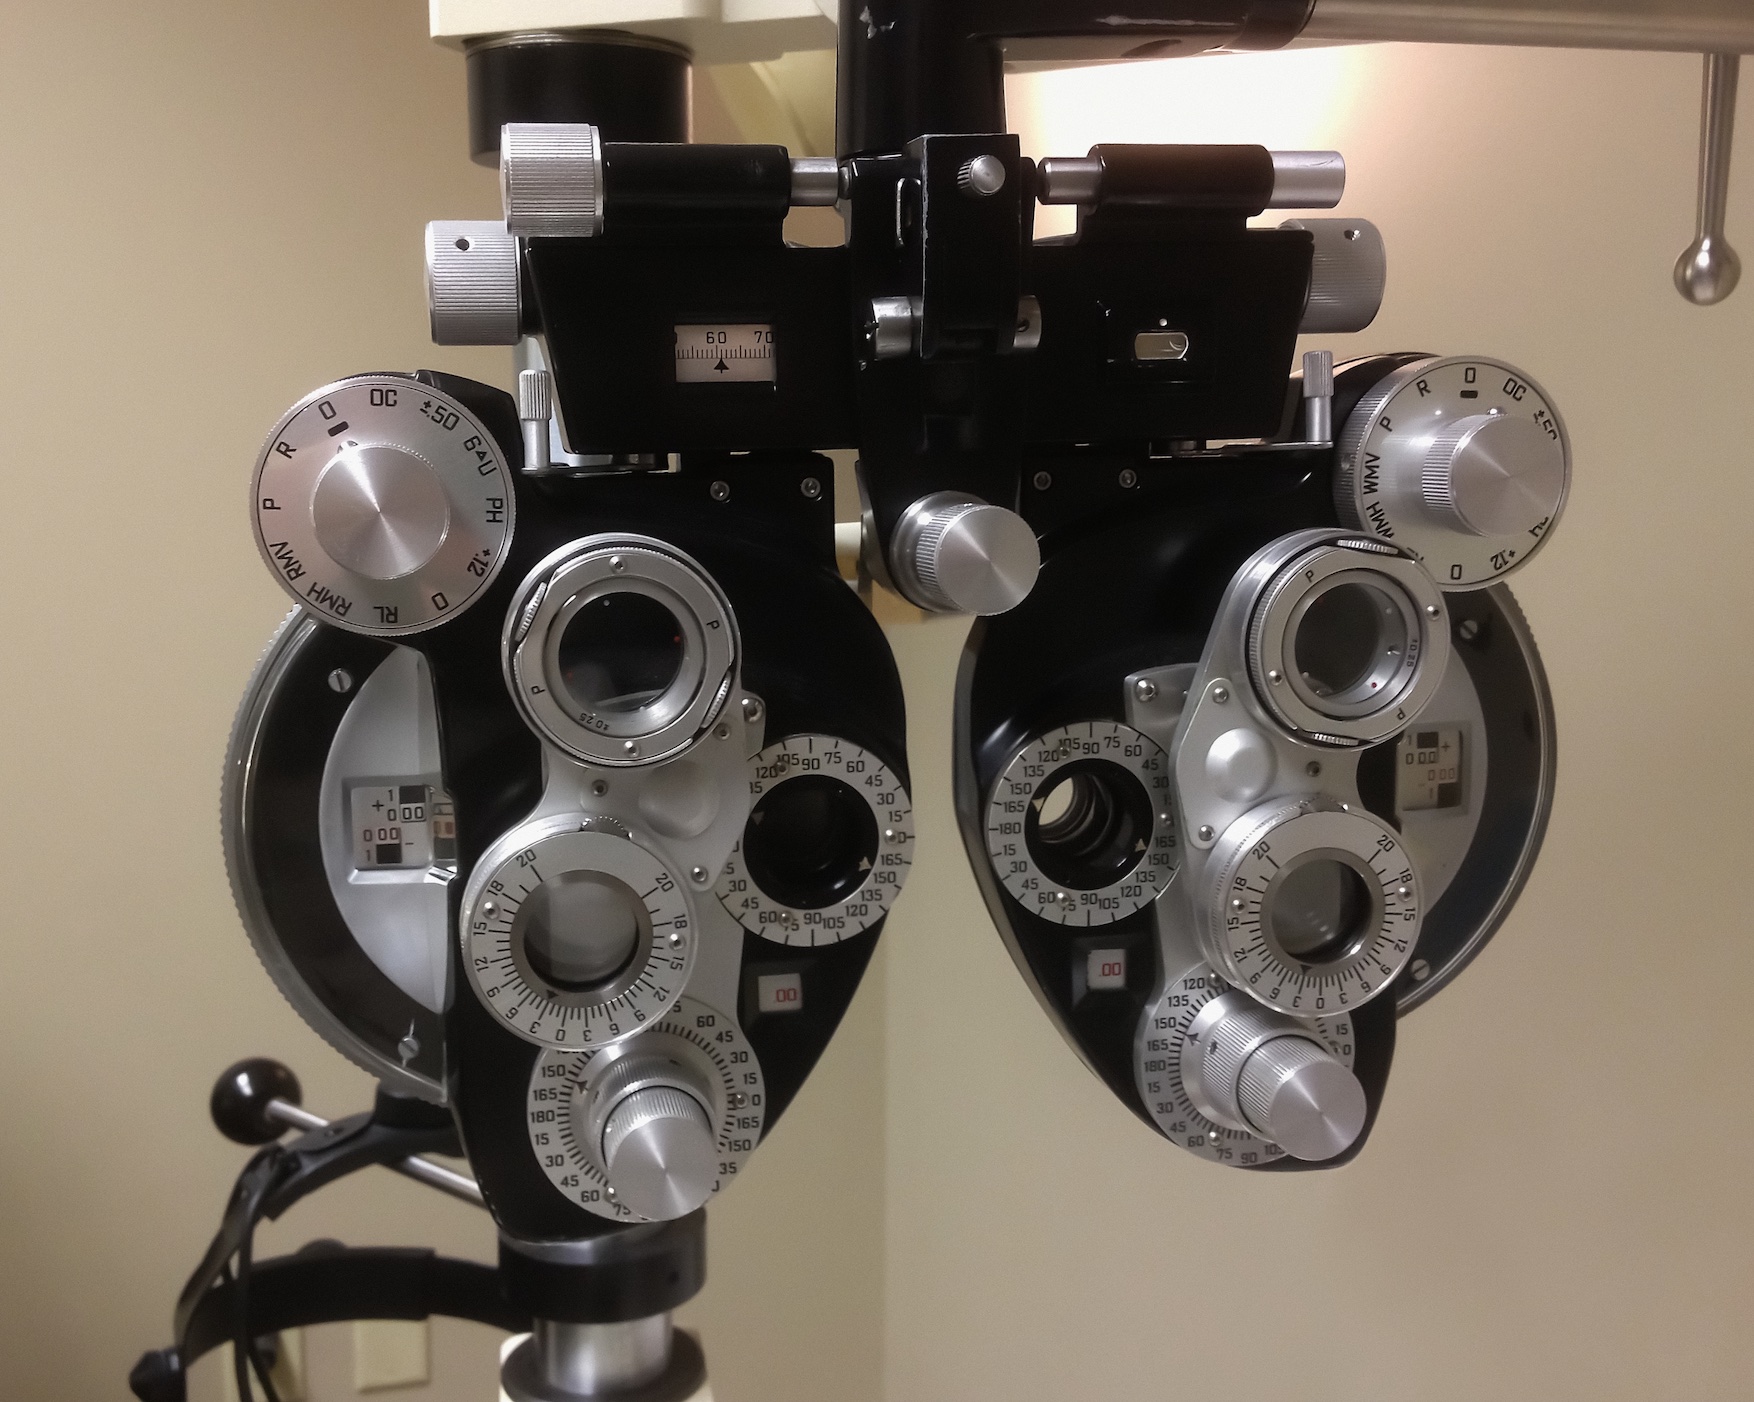 A phoropter - an optometric instrument used by the eye care specialist when performing eye examinations; image by CDC, via Unsplash.com.